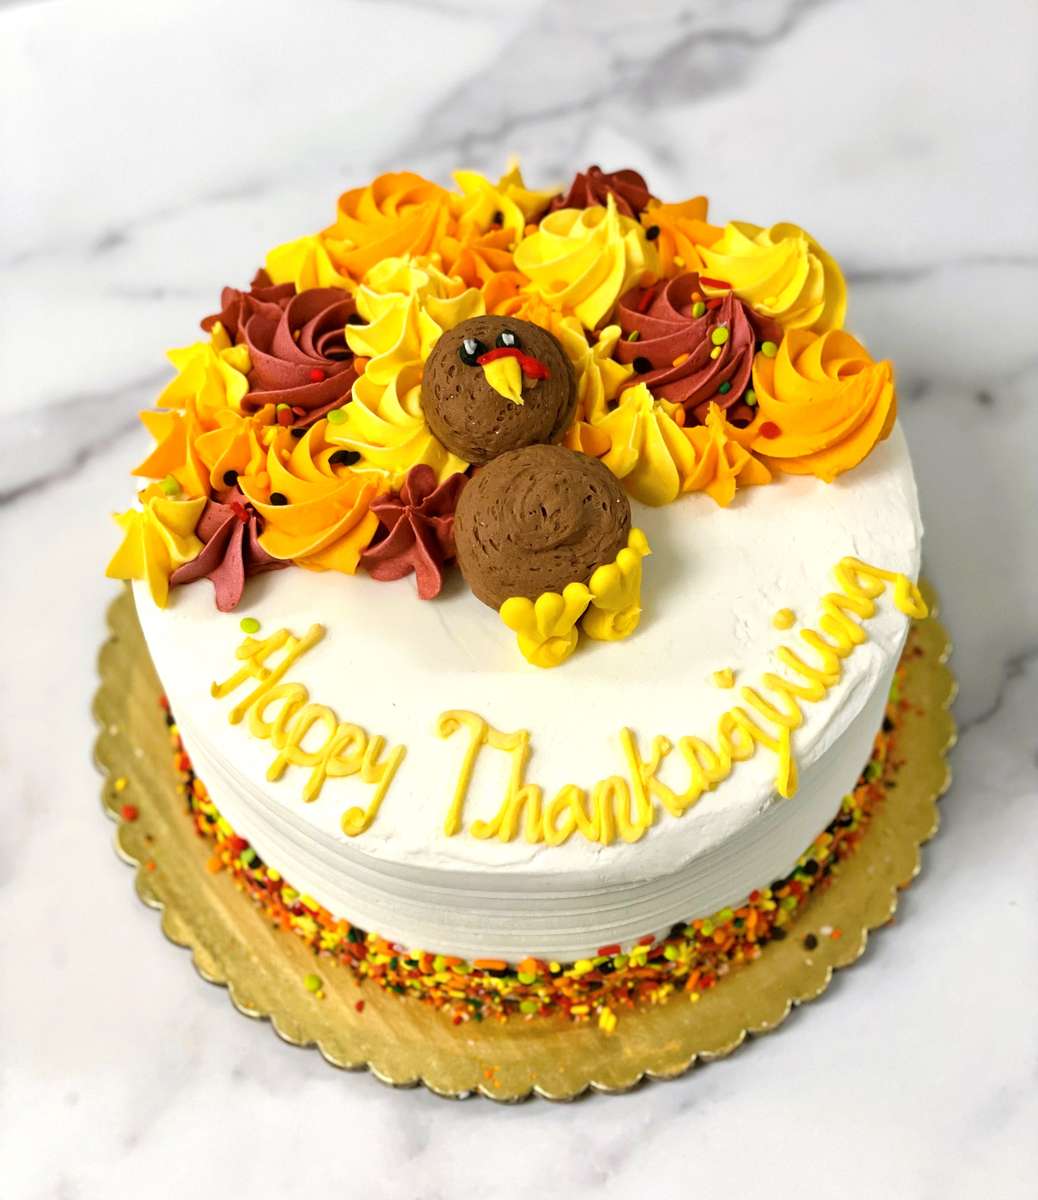 Video: How to make a turkey cake topper - Cake Journal